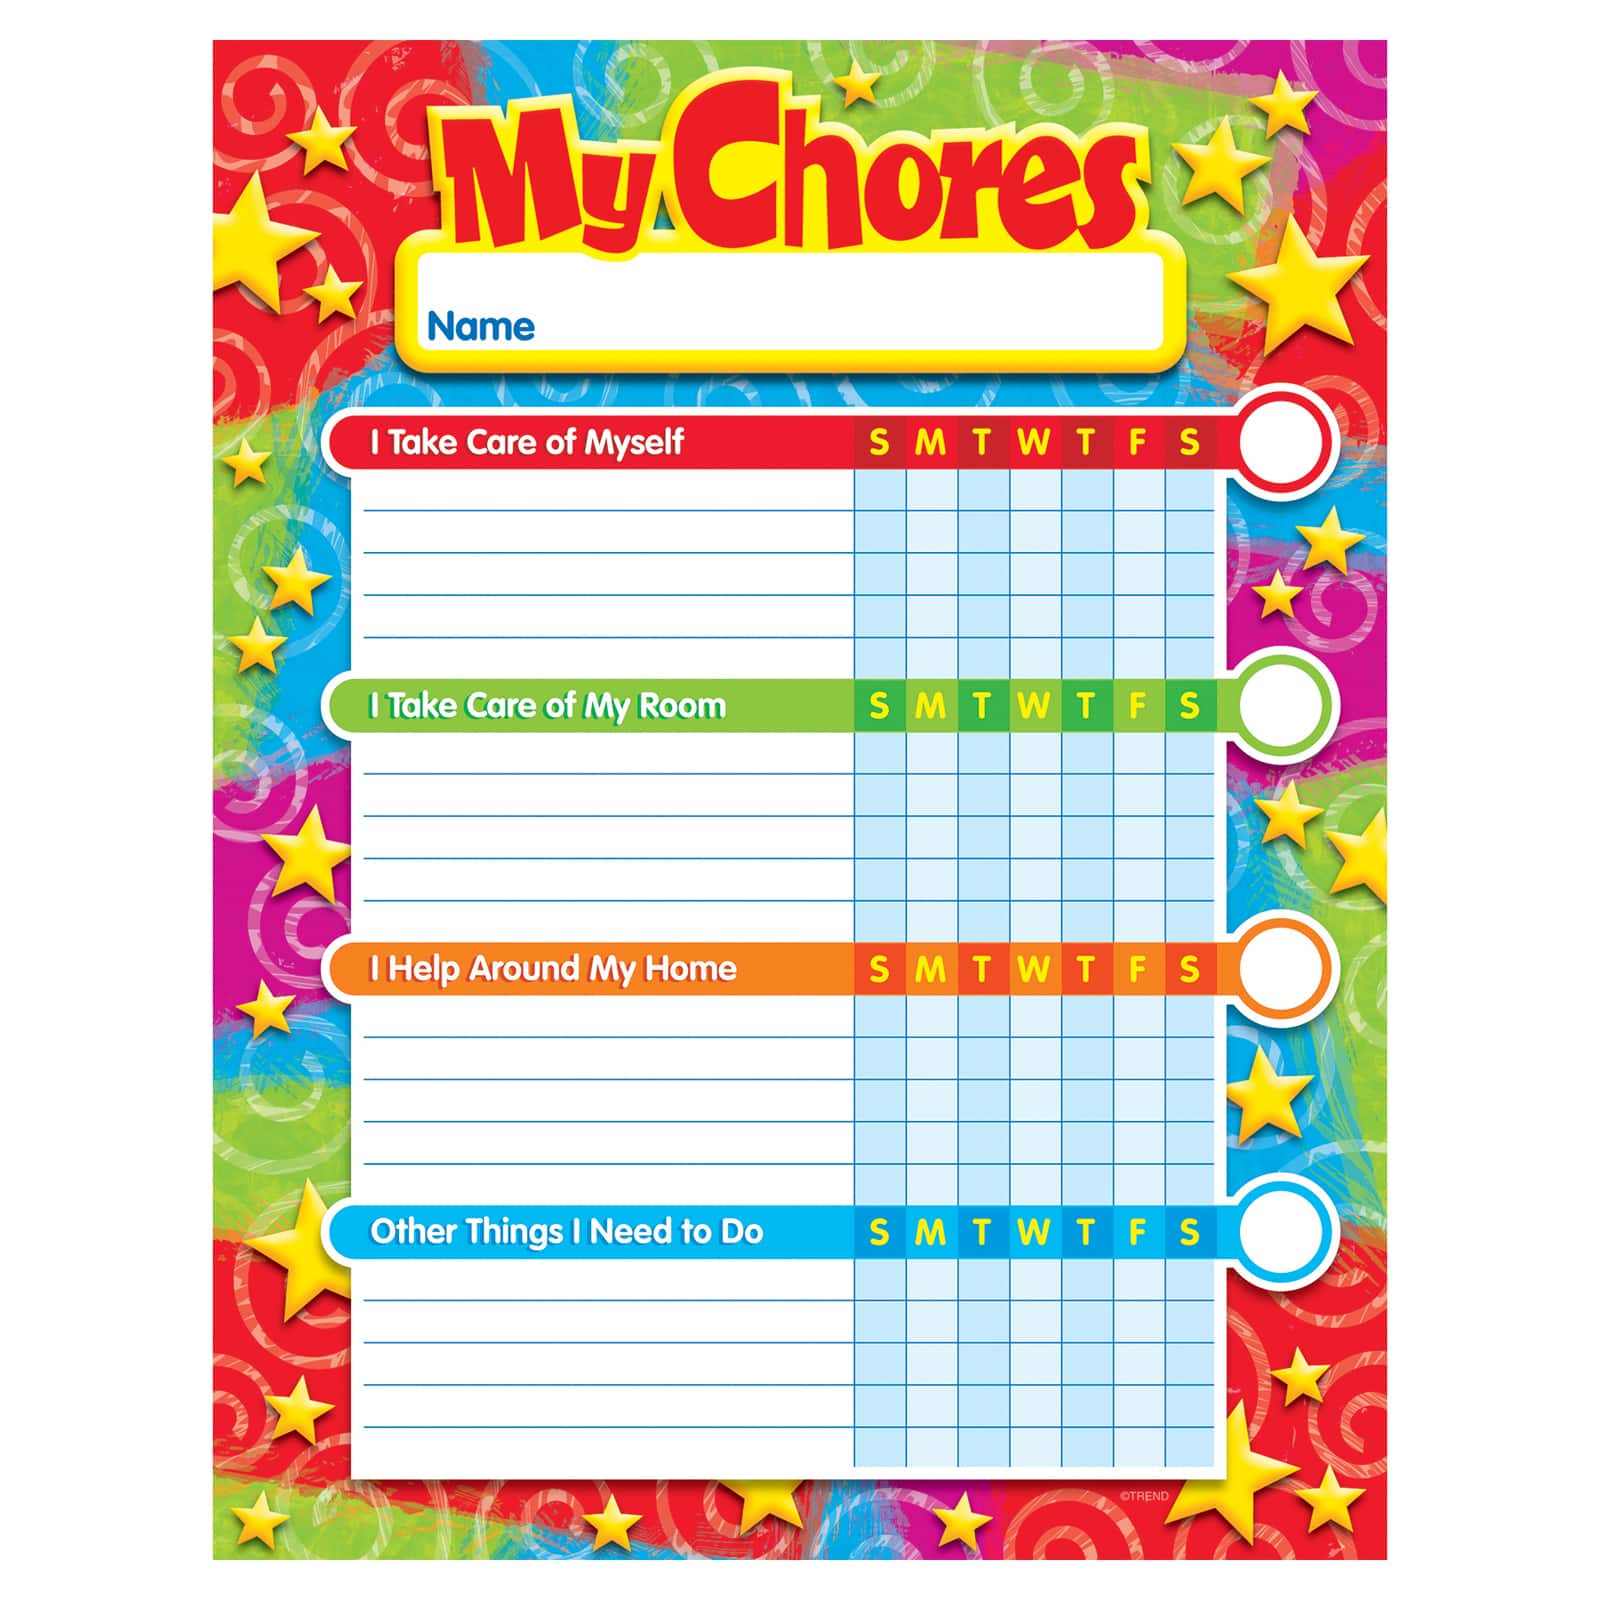 Picture Chore Chart